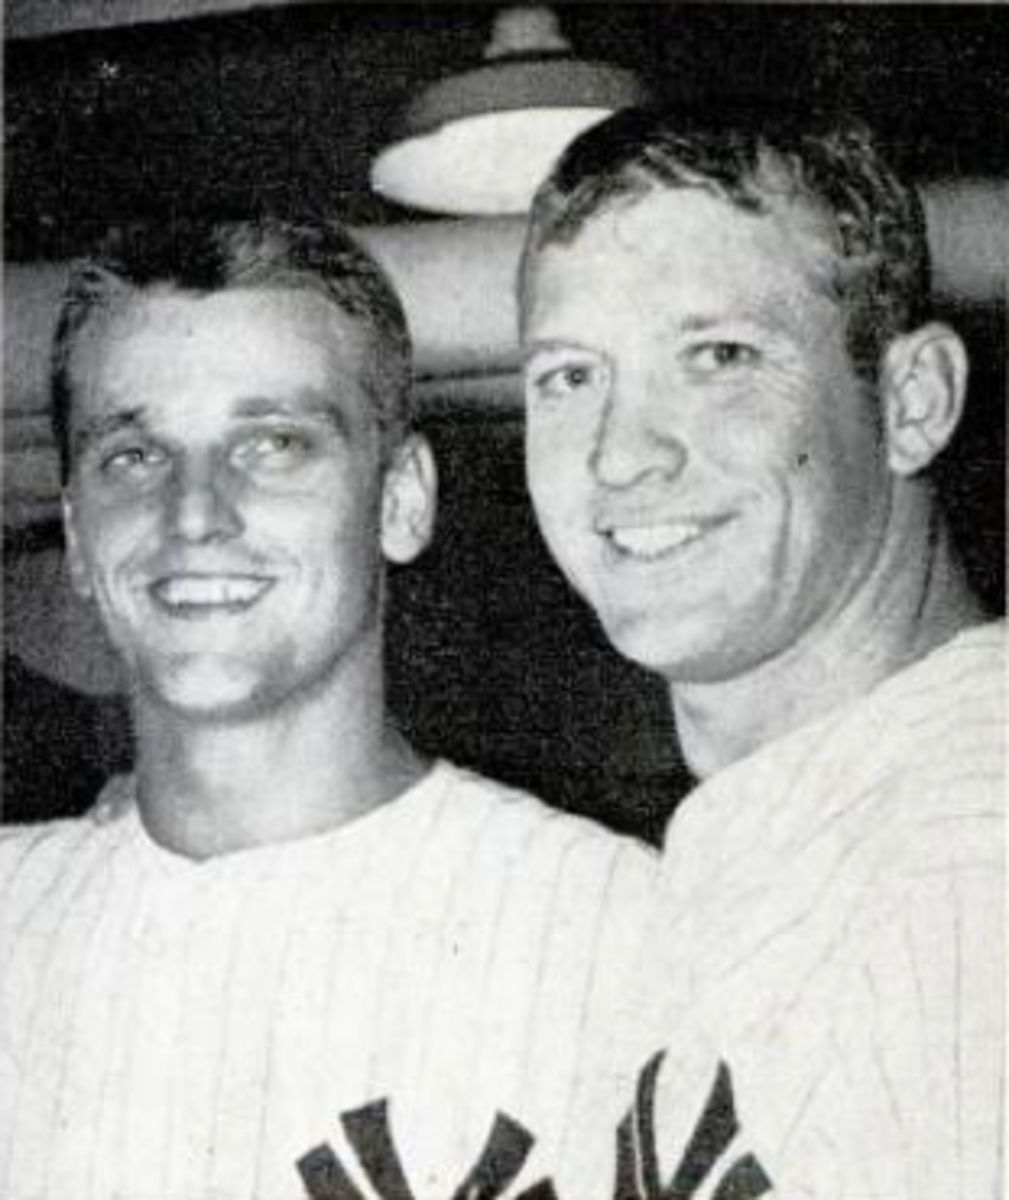 Mickey Mantle (right) joined Roger Maris in 1961 in chasing Babe Ruth's single-season home run record.